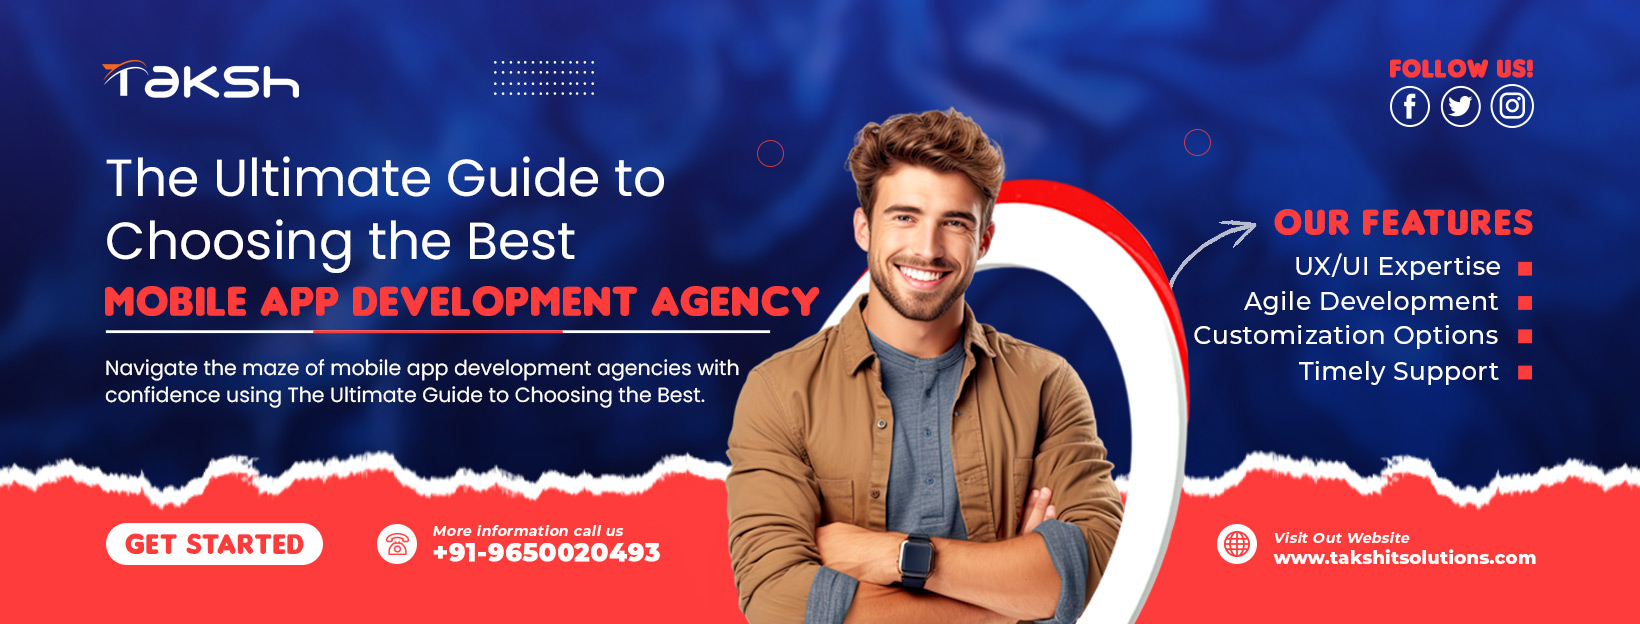 The Ultimate Guide to Choosing the Best Mobile App Development Agency